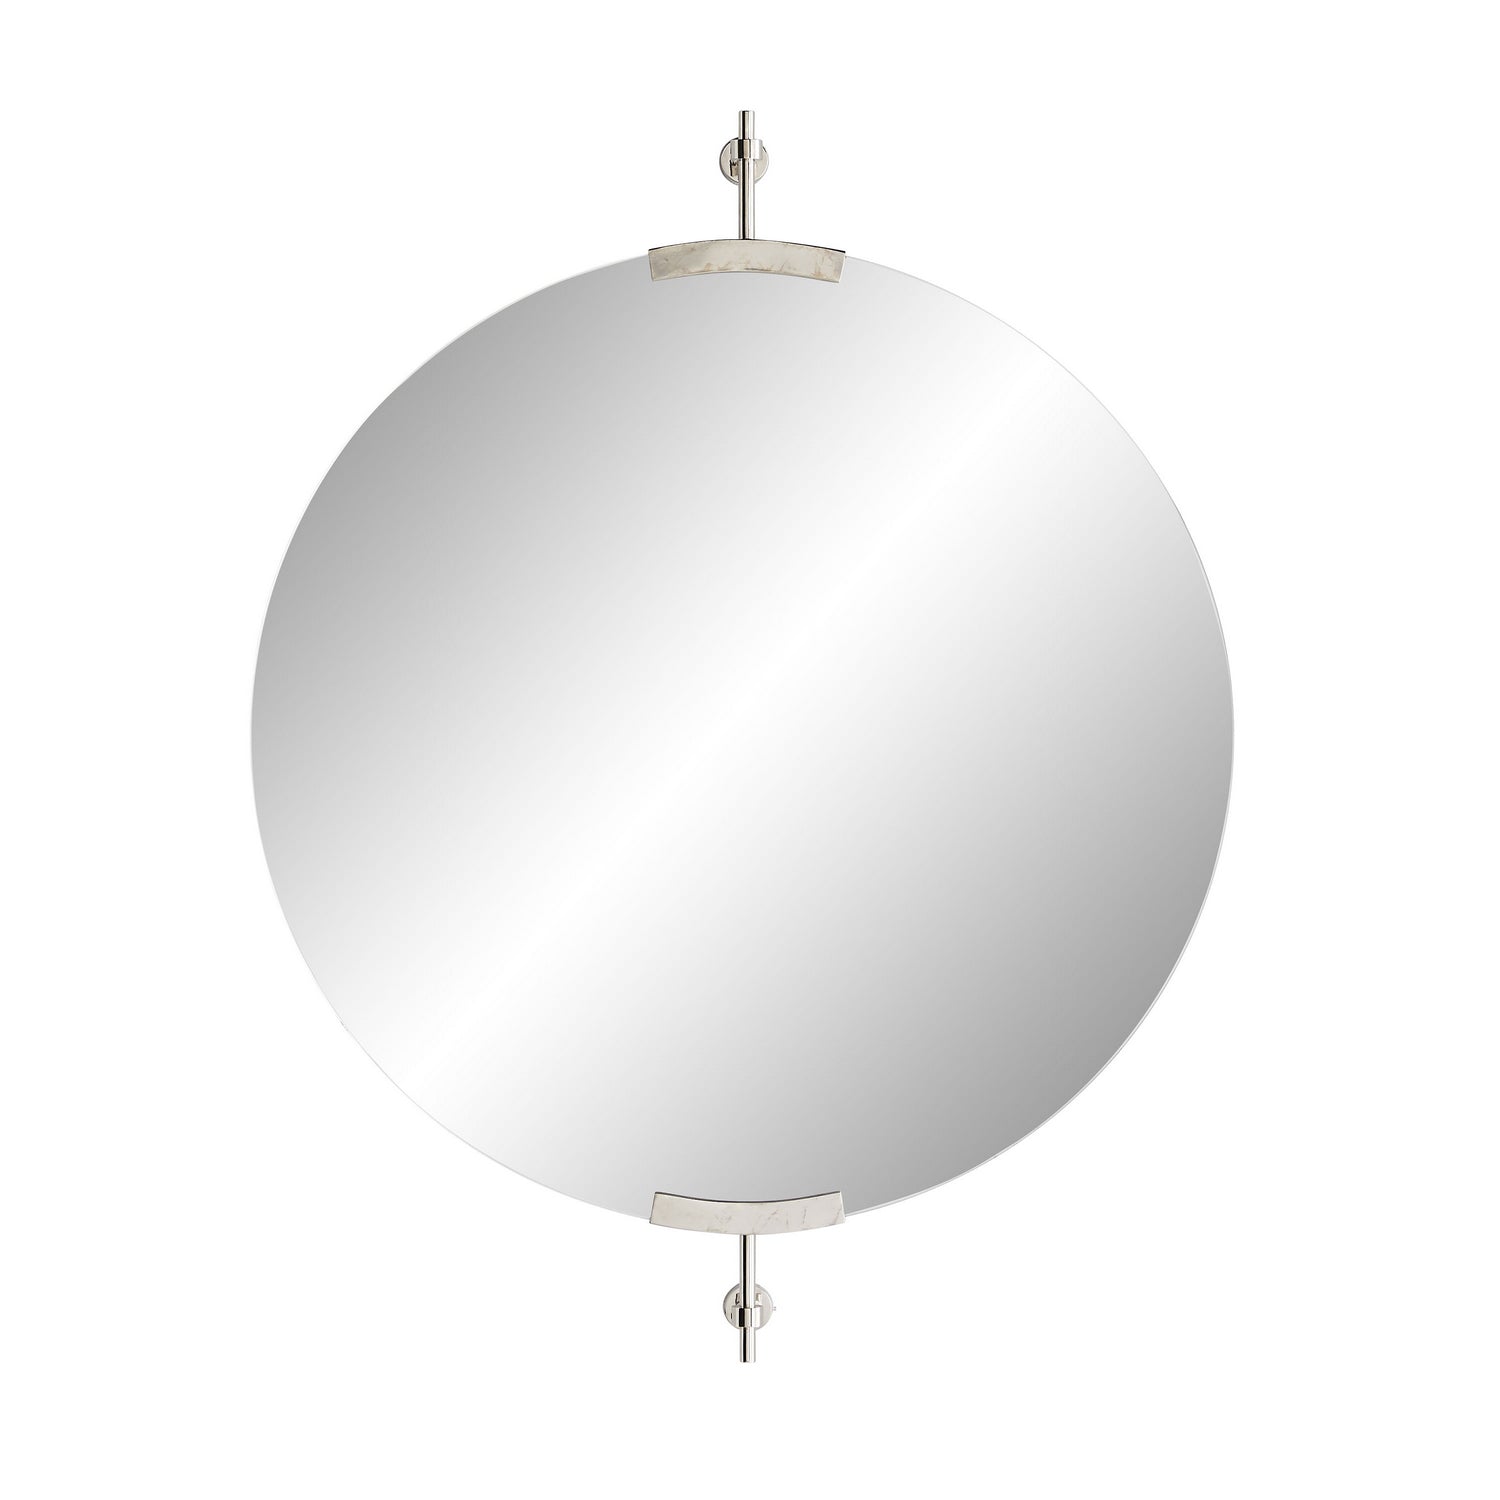 Mirror from the Madden collection in Polished Nickel finish